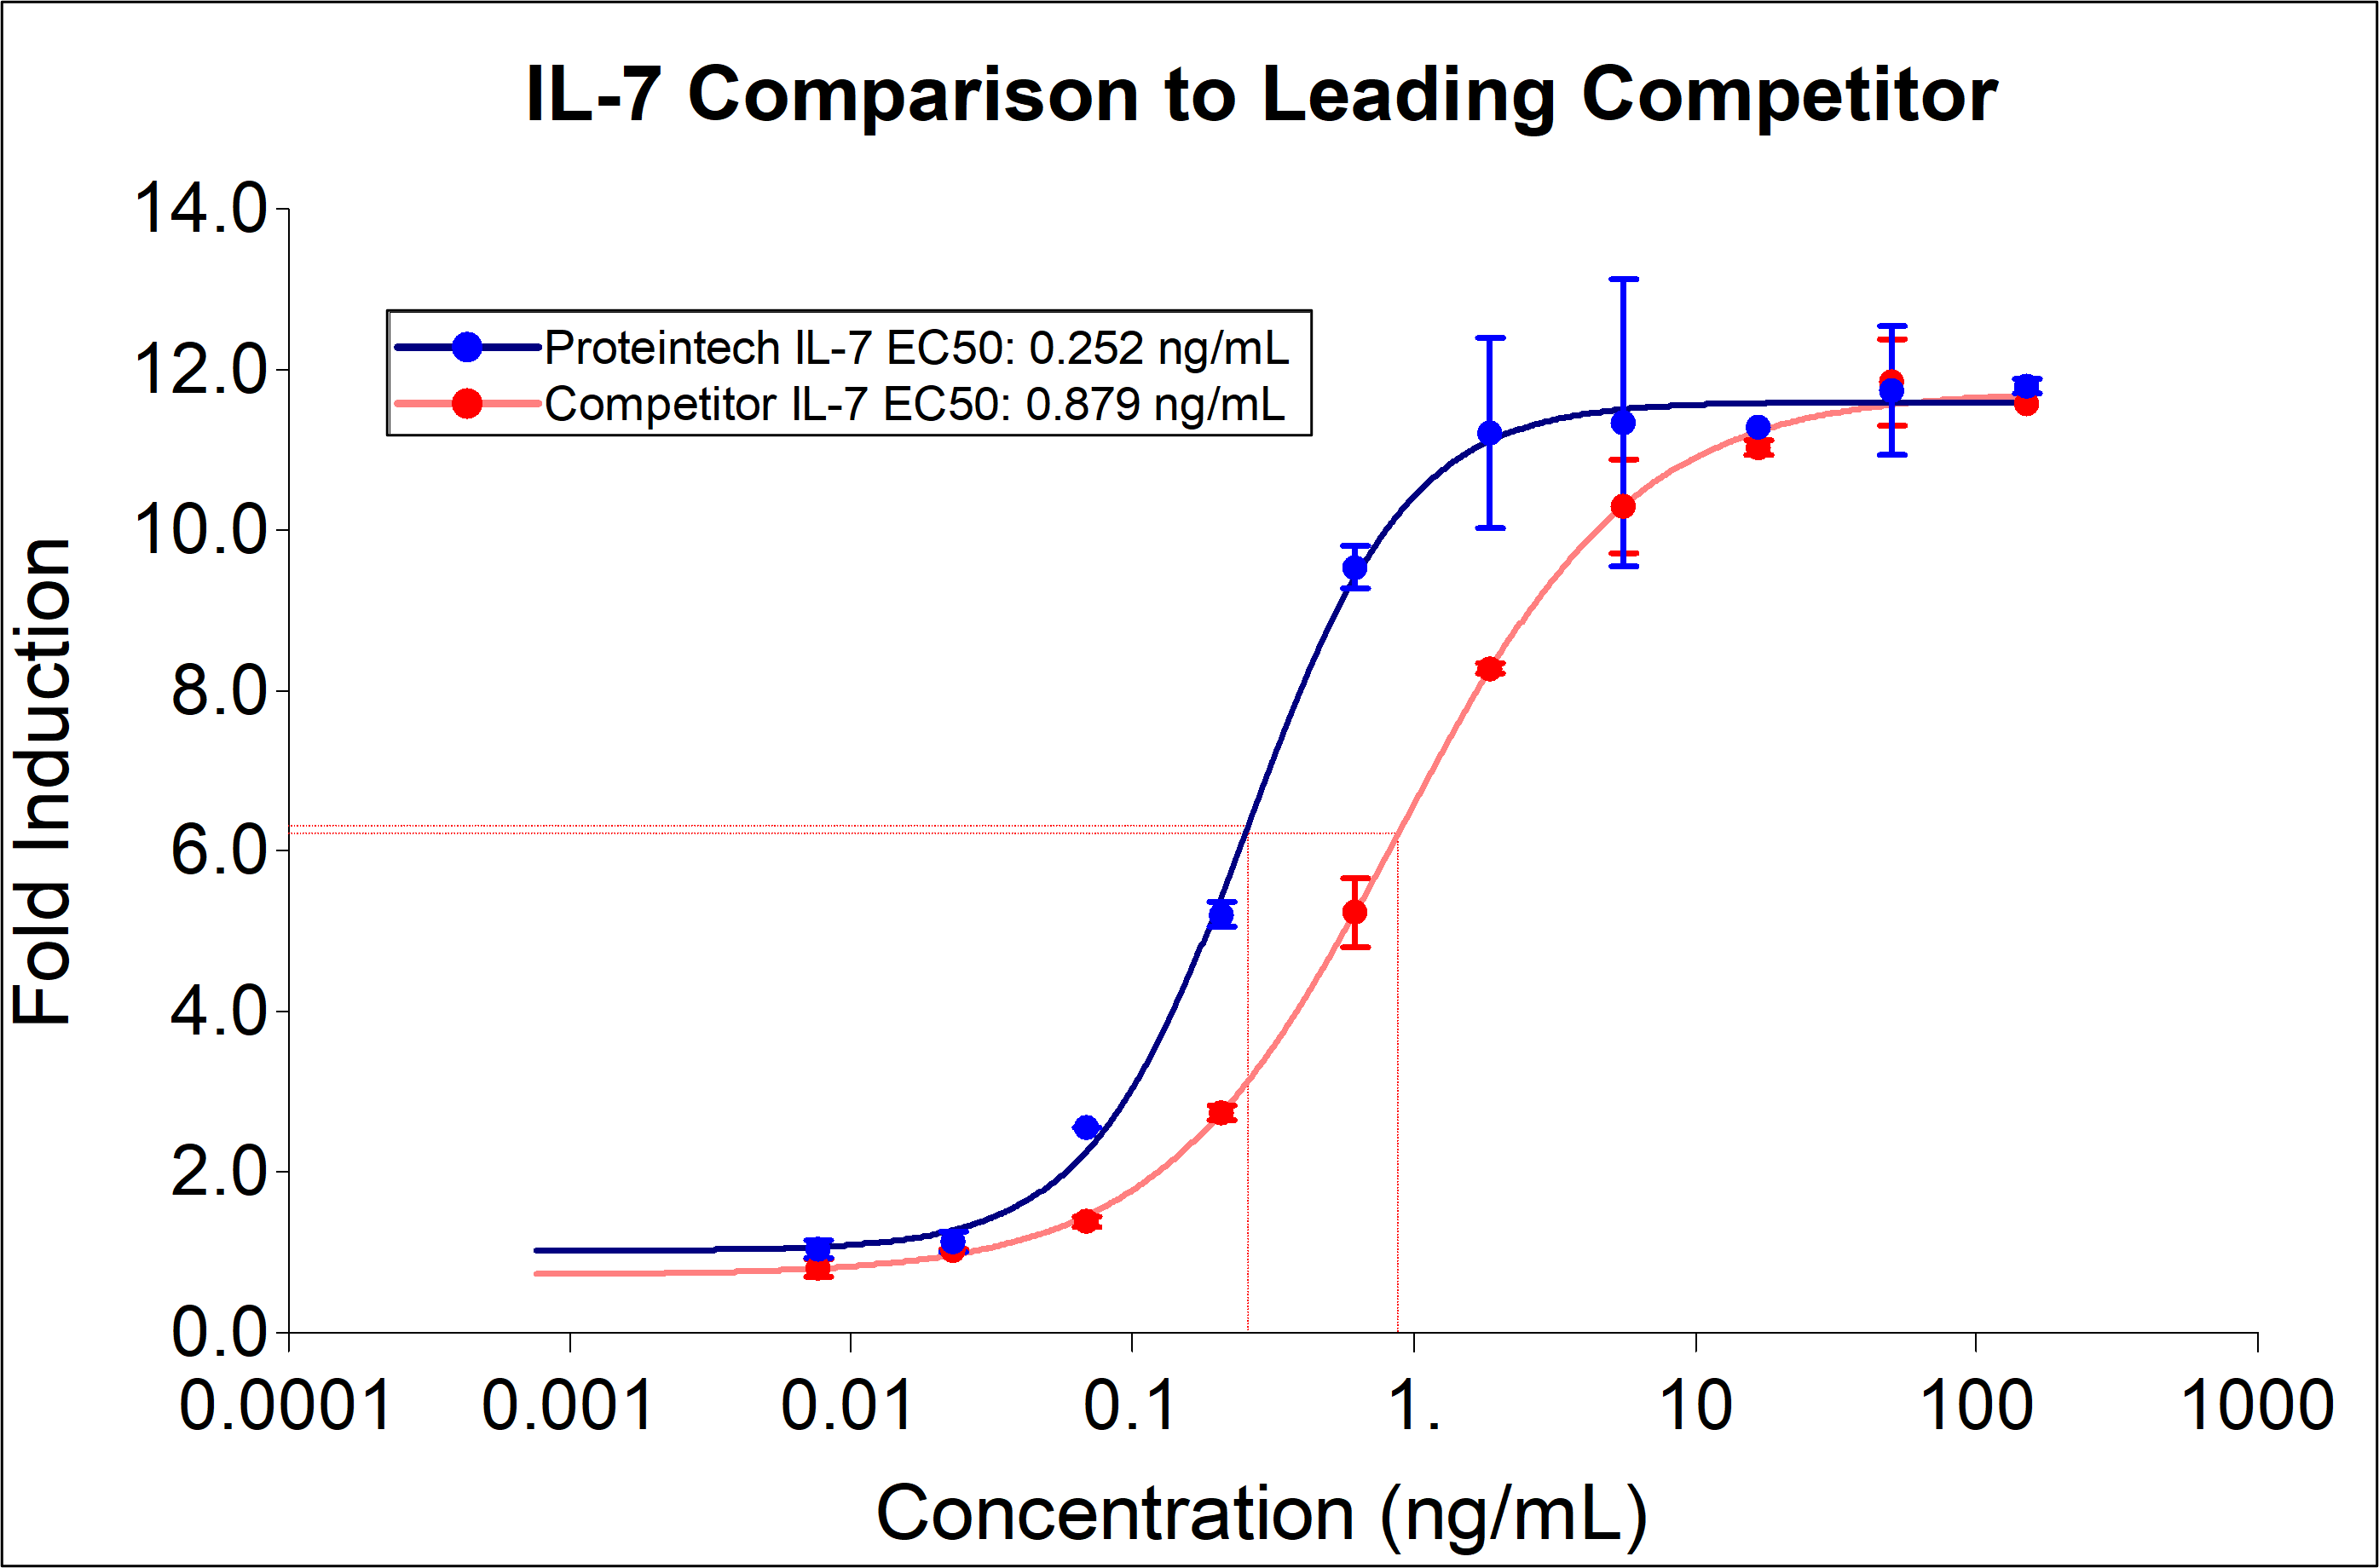 Proteintech IL-7 (HZ-1281) demonstrates 3-fold lower EC50 and equivalent induction of proliferation compared to a leading competitor. Recombinant human IL-7 stimulates dose-dependent proliferation of the 2E8 murine B lymphocyte cell line. Cell number was quantitatively assessed by PrestoBlue® Cell Viability Reagent. 2E8 cells were treated with increasing concentrations of recombinant IL-7 for 120 hours. The EC50 was determined using a 4-parameter non-linear regression model. The EC50 range is 0.1-1.4 ng/mL.